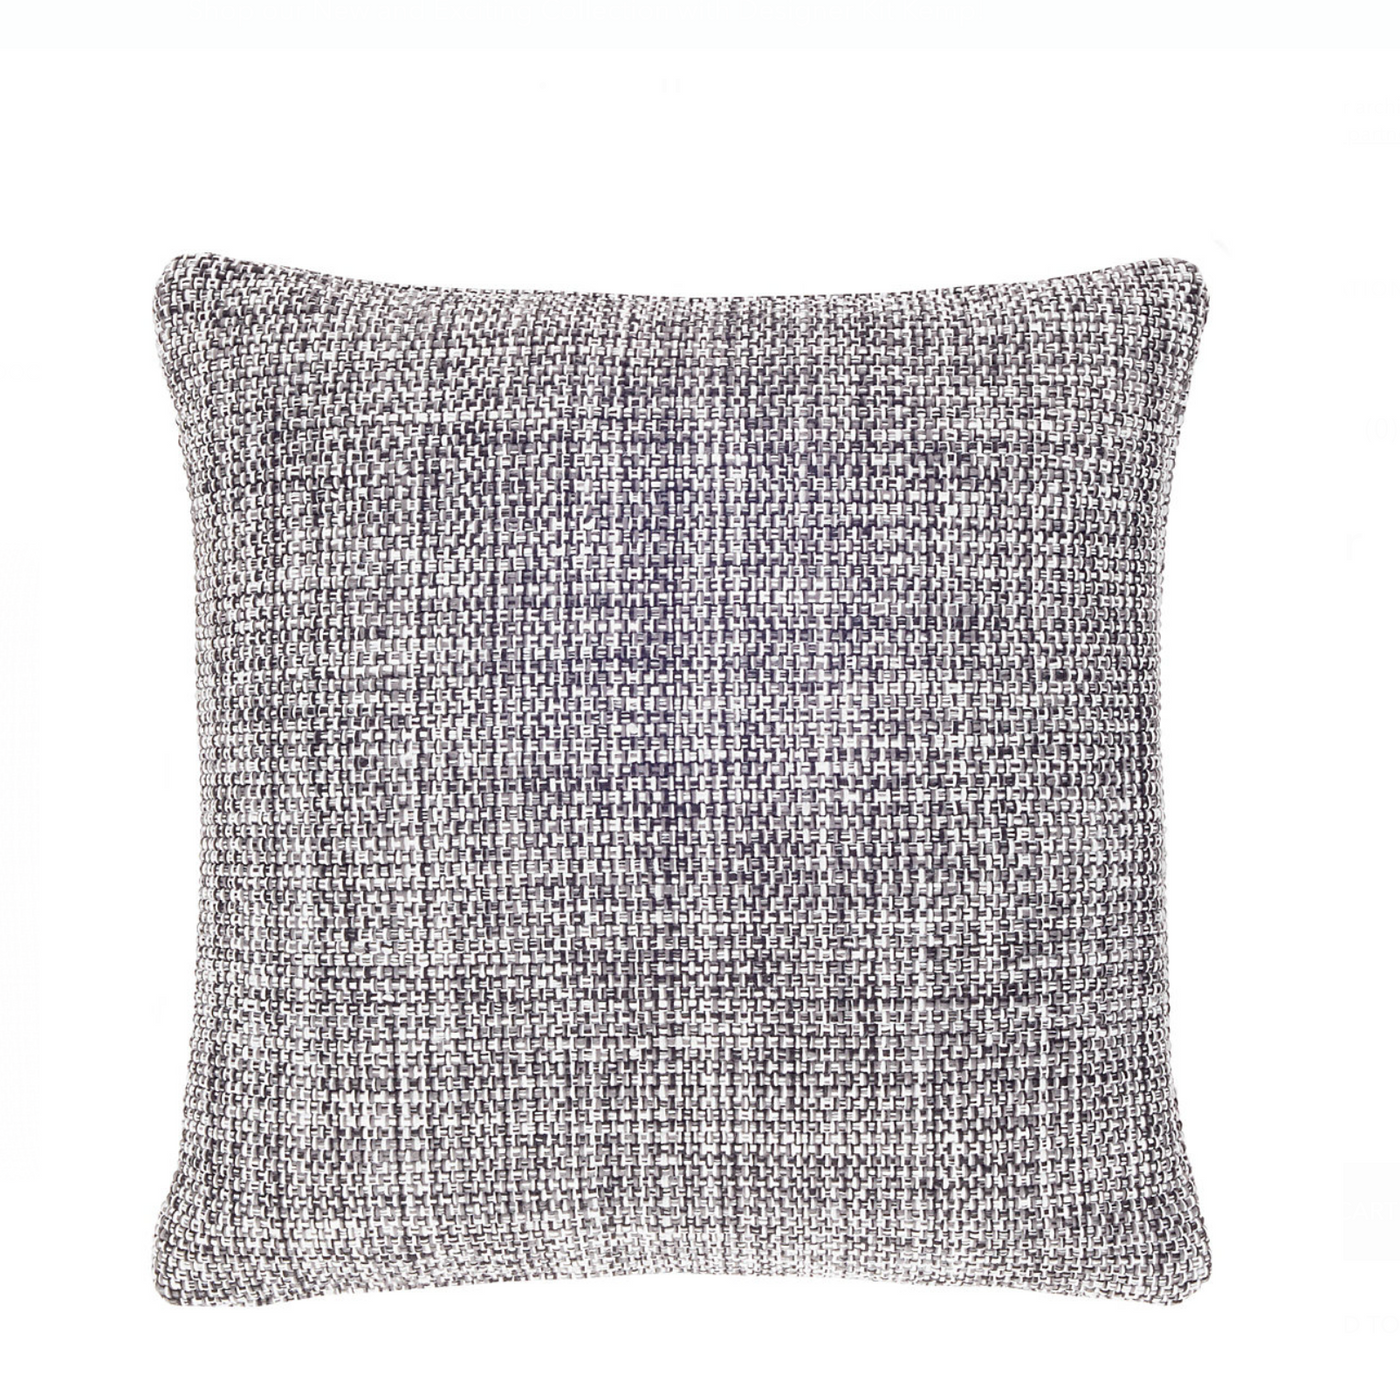 PILLOW DECORATIVE INDOOR/OUTDOOR TRICOLOR-MARLED (Available in 2 Colors and 2 Sizes)